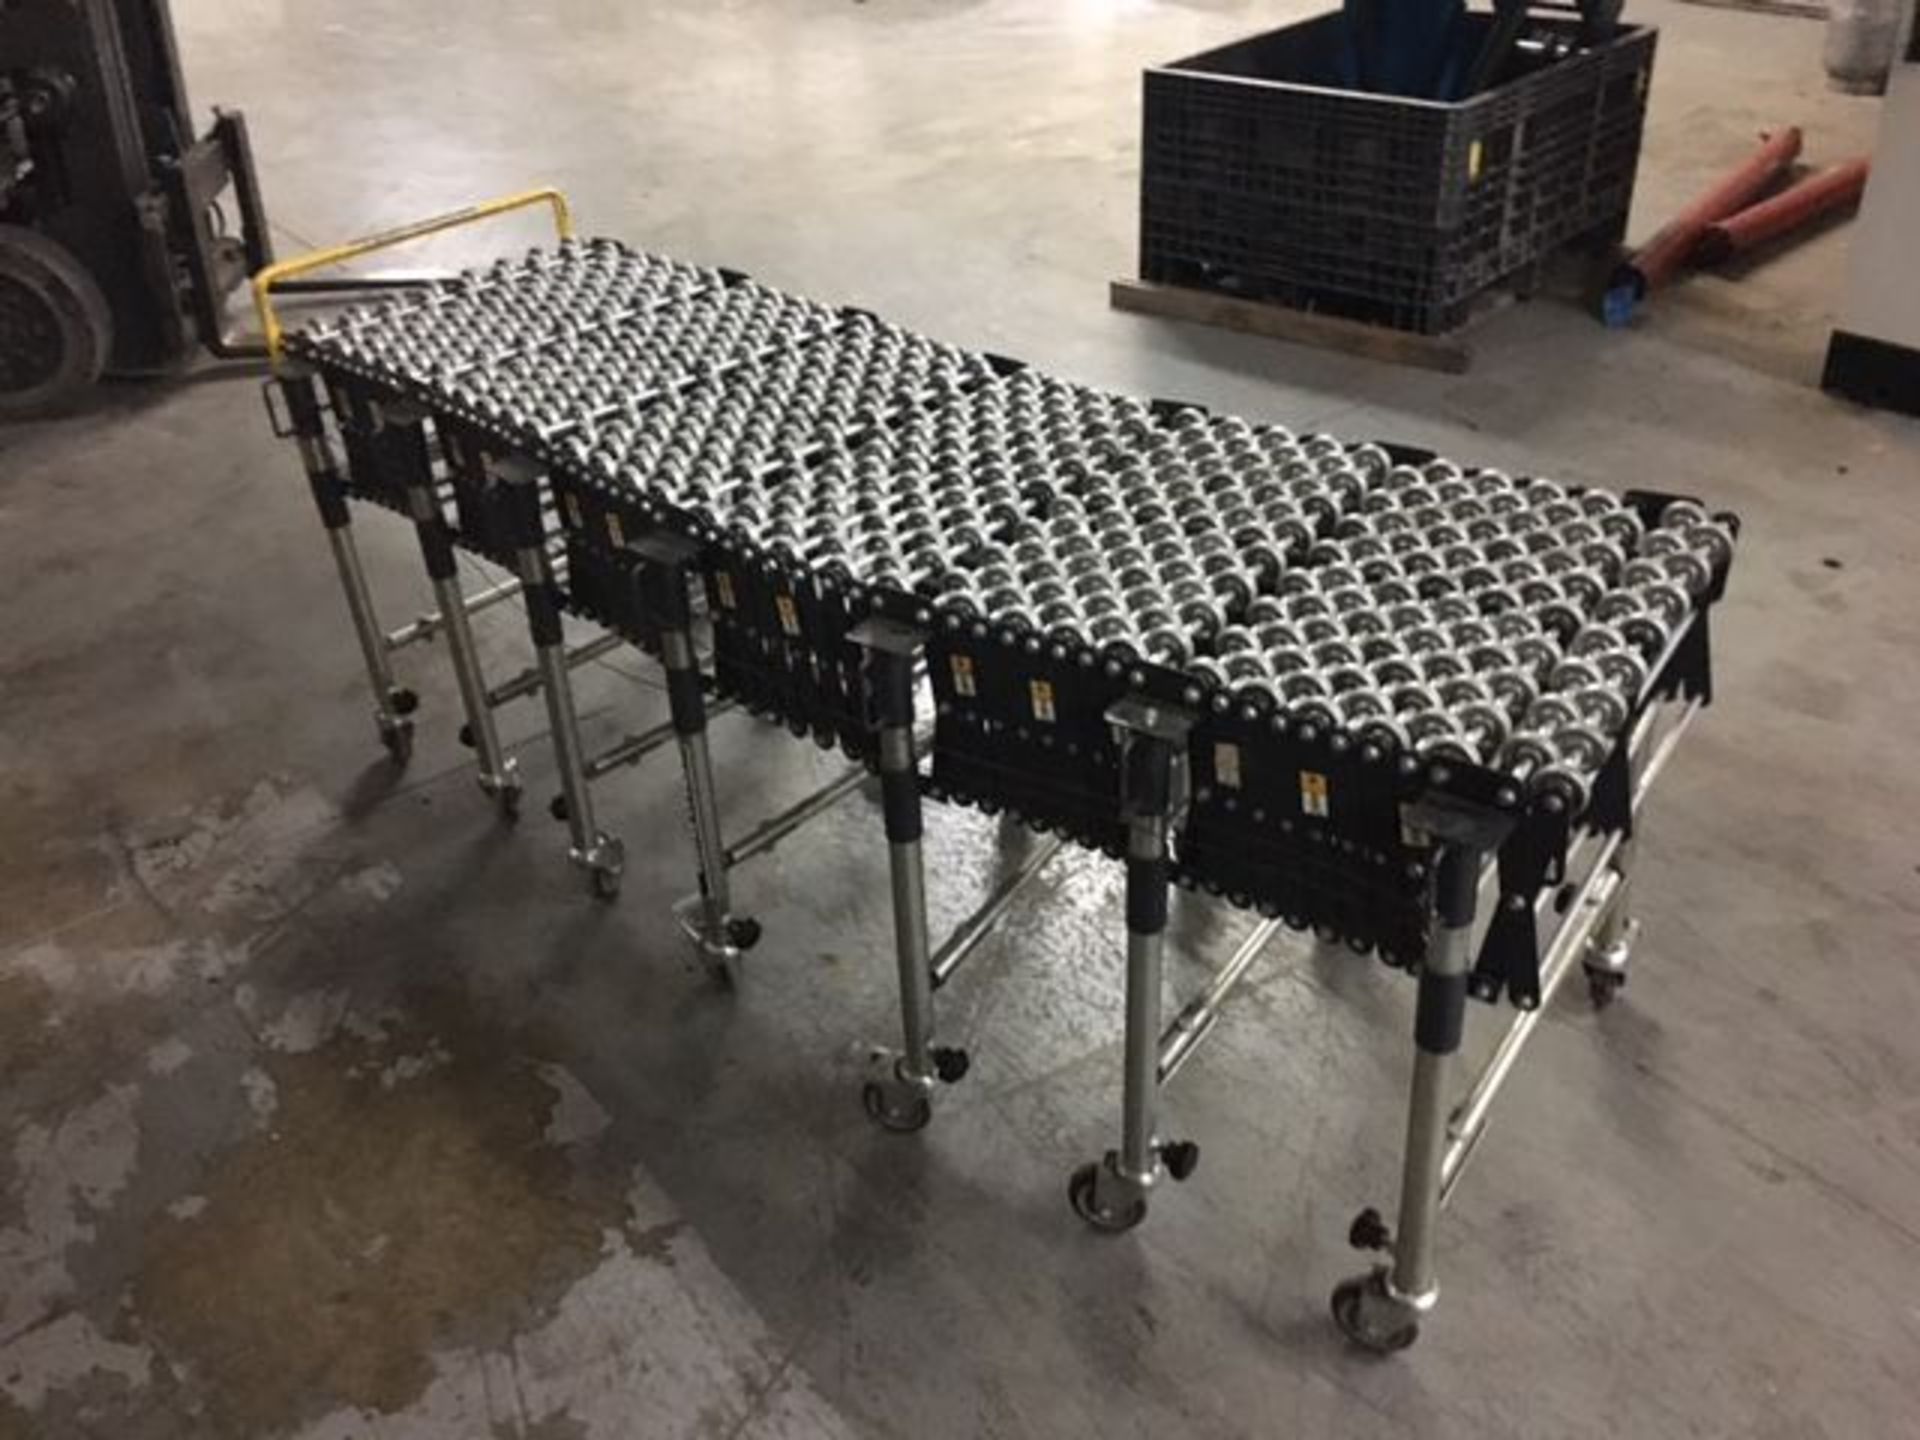 EXPANDABLE SKATE CONVEYOR; 24" WIDE X 80" WHEN CLOSED X 27' WHEN EXTENDED - LOCATED AT 6600 STOCKTON